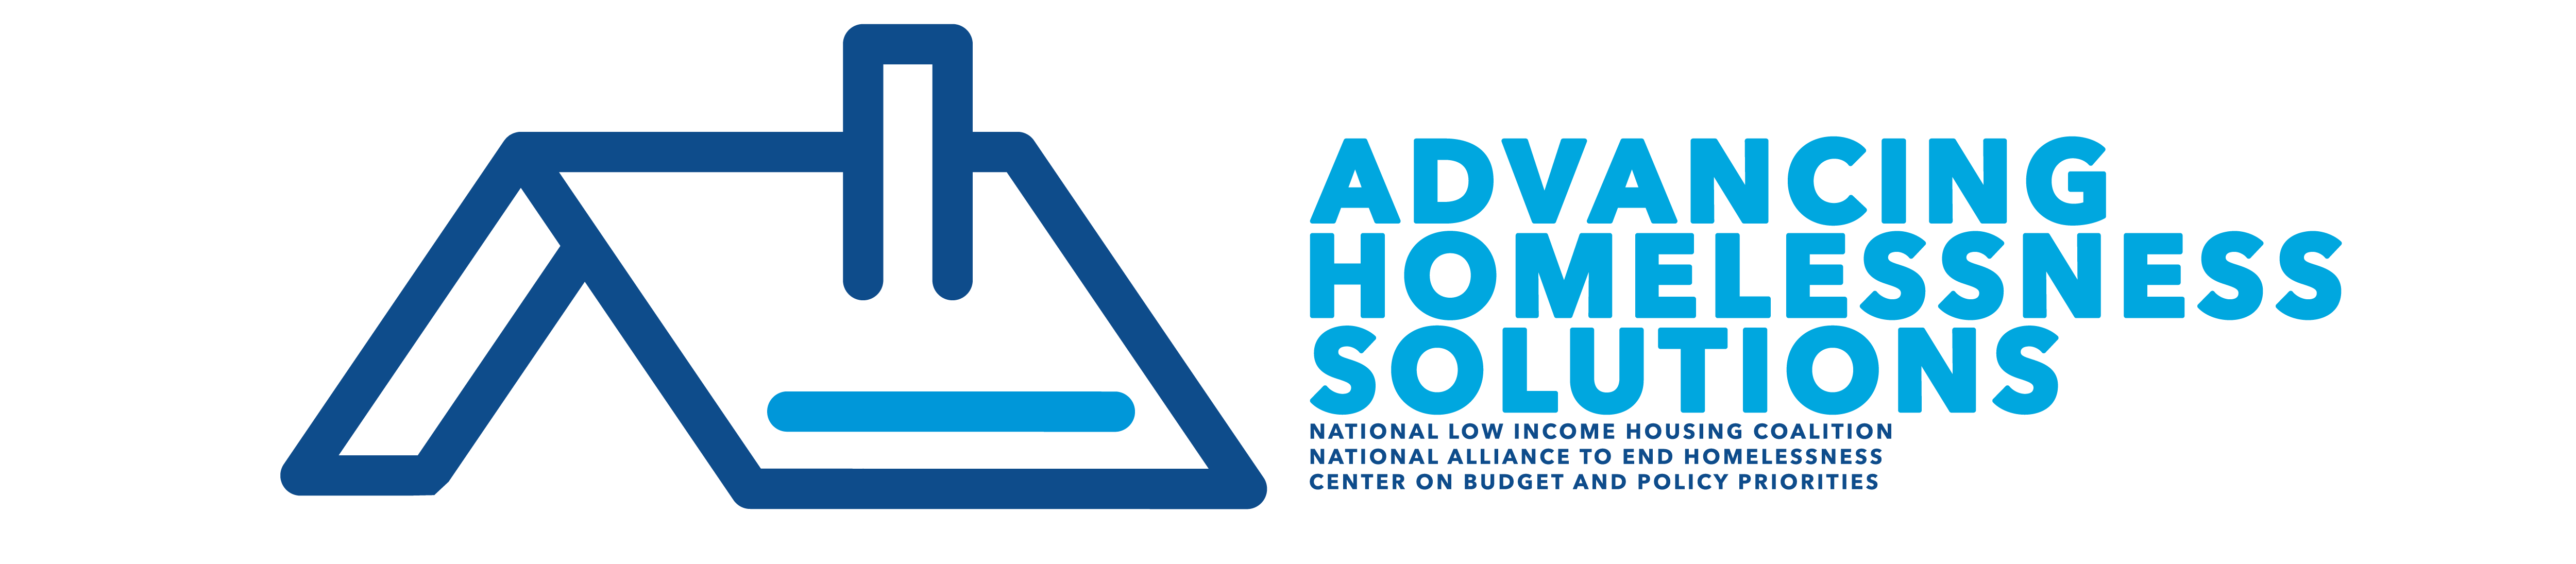 Advancing Homelessness Solutions